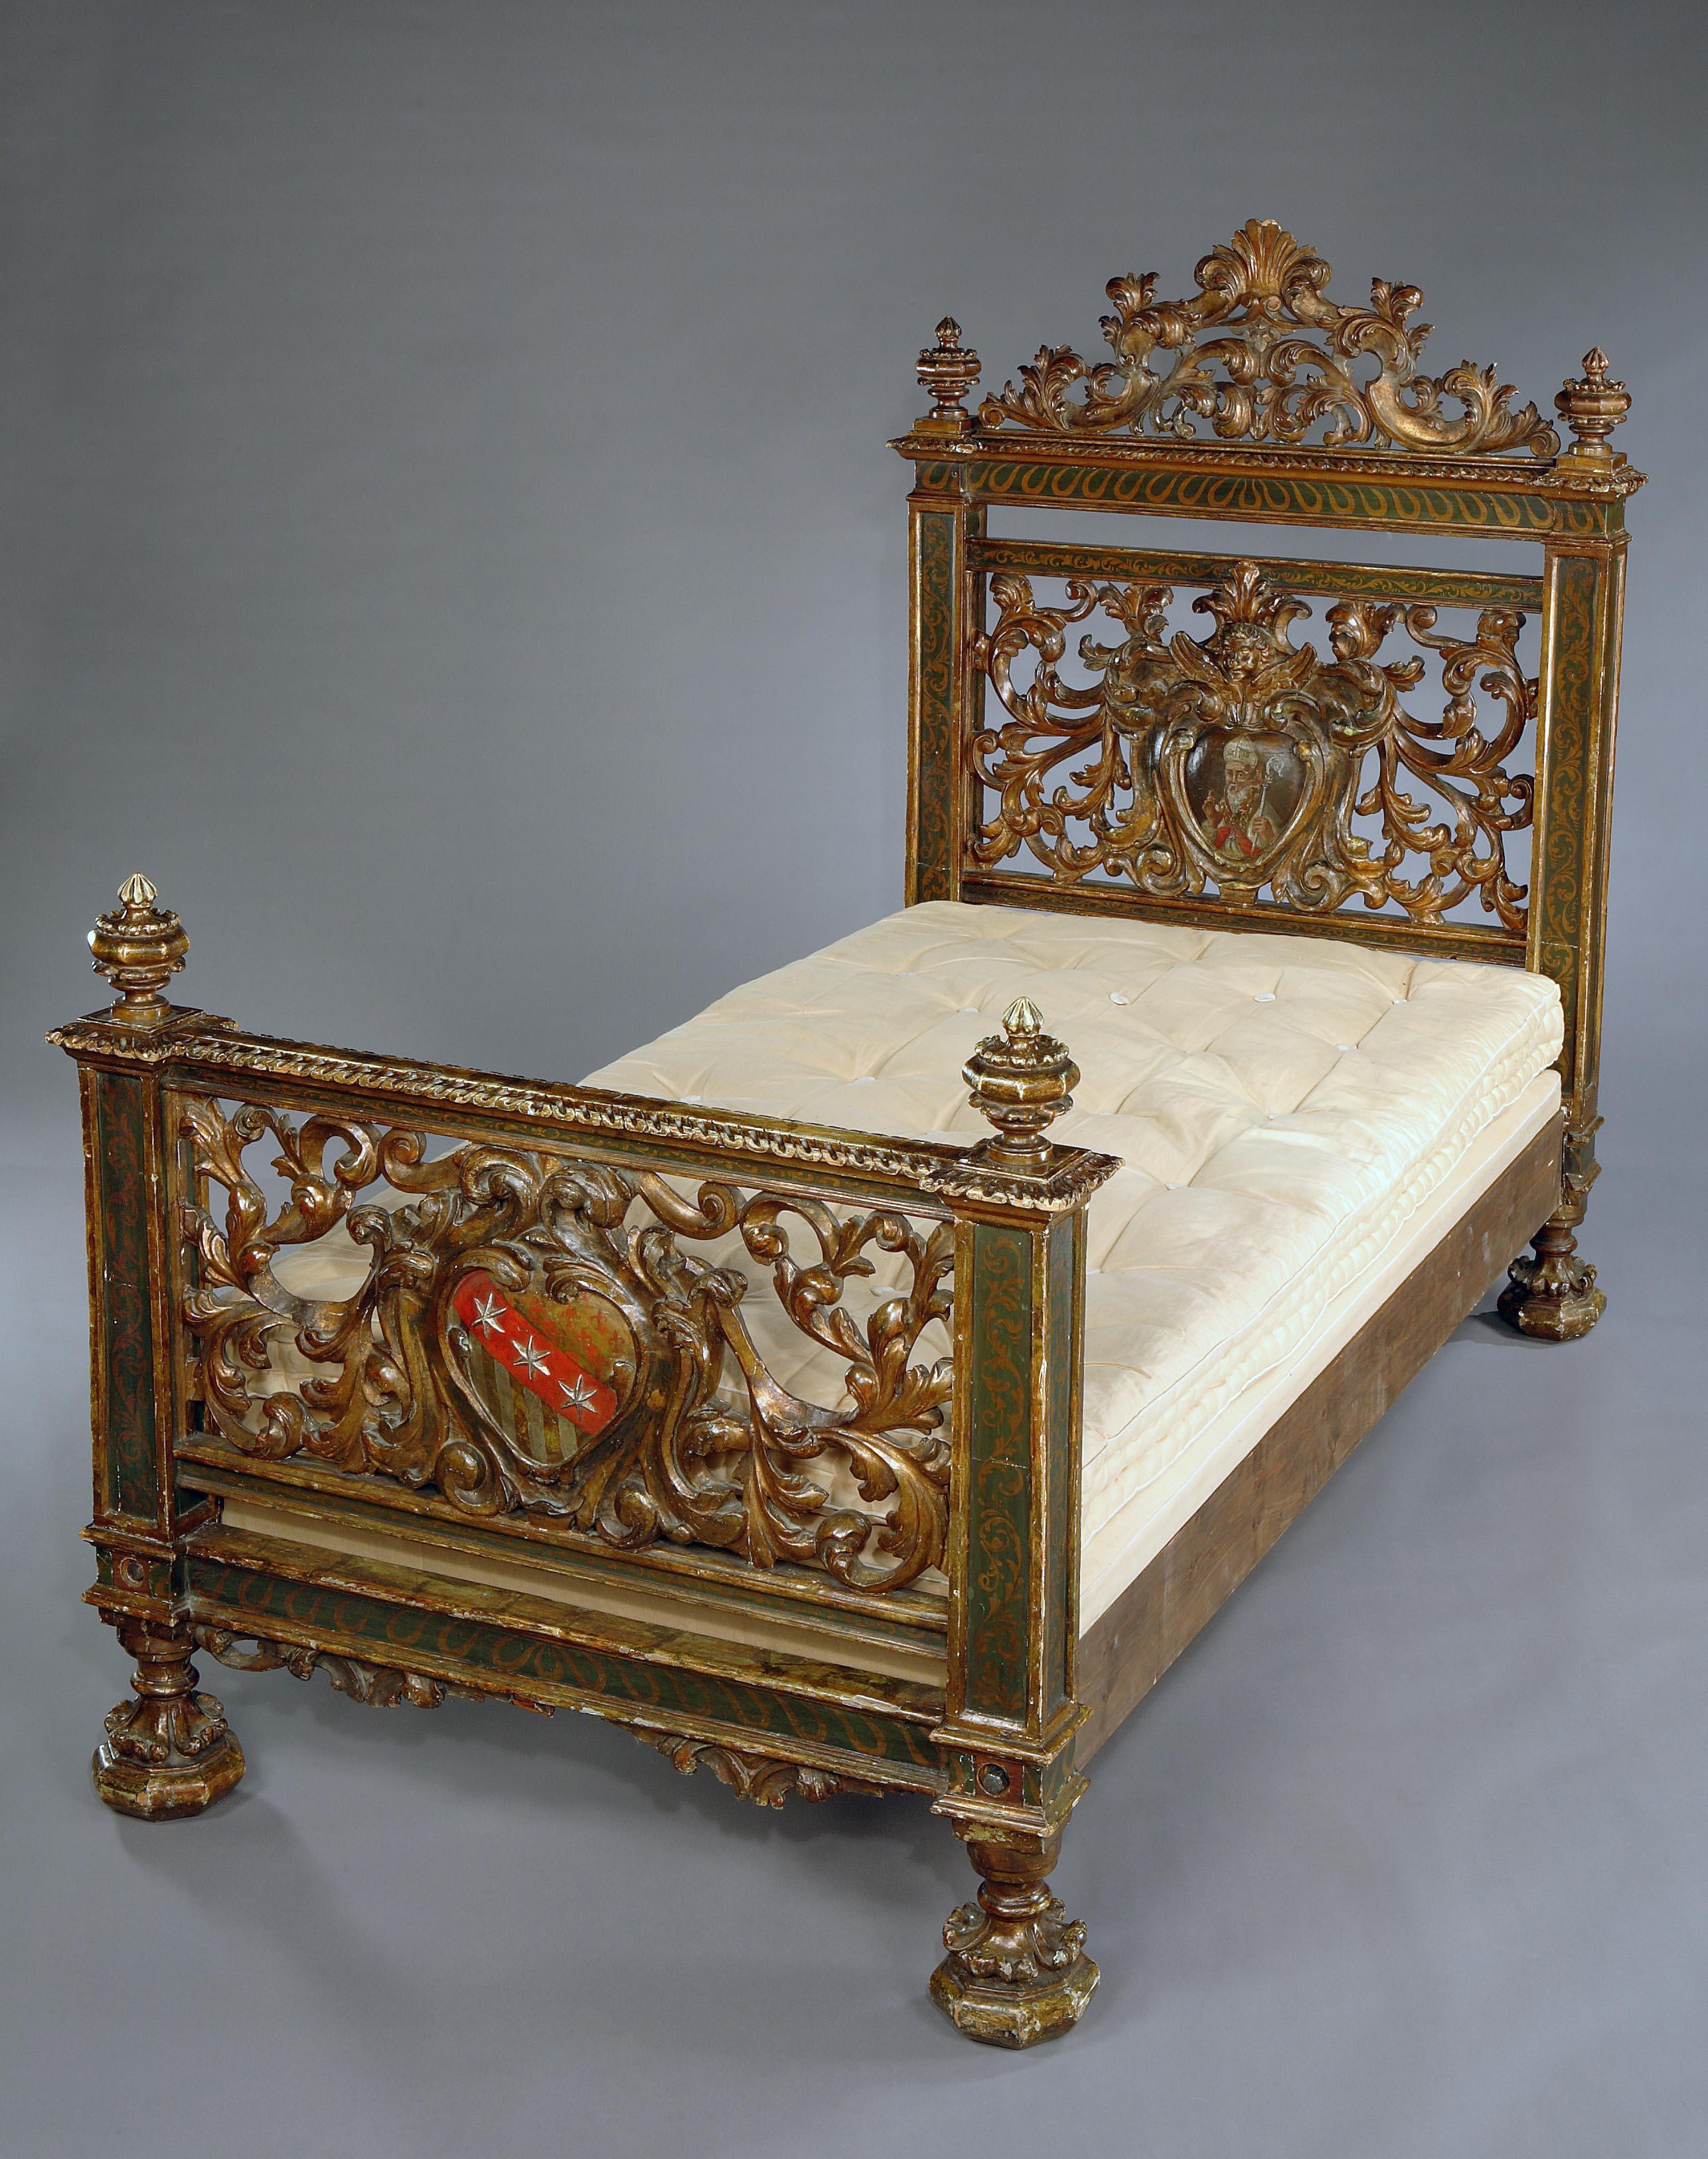 The headboard is surmounted with a carved cresting and turned finials at each end, and the frame painted with scrollwork. The centre of the headboard has a cartouche containing a painting of a coat of arms, surrounded by profuse, stylized, acanthus